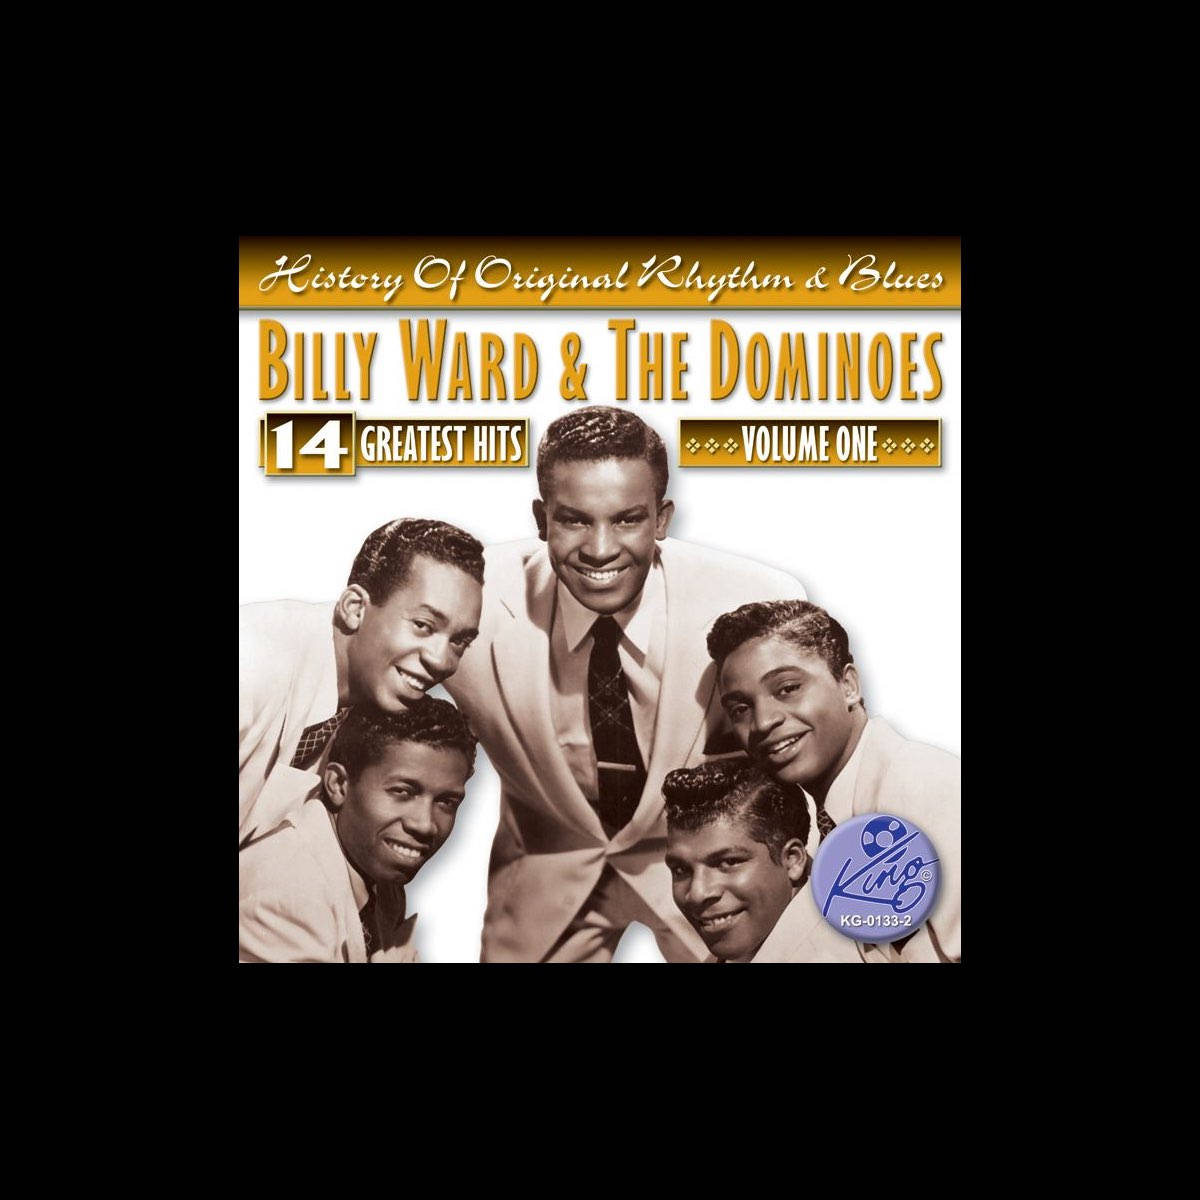 Billy Ward And The Dominoes Record Cover Wallpaper